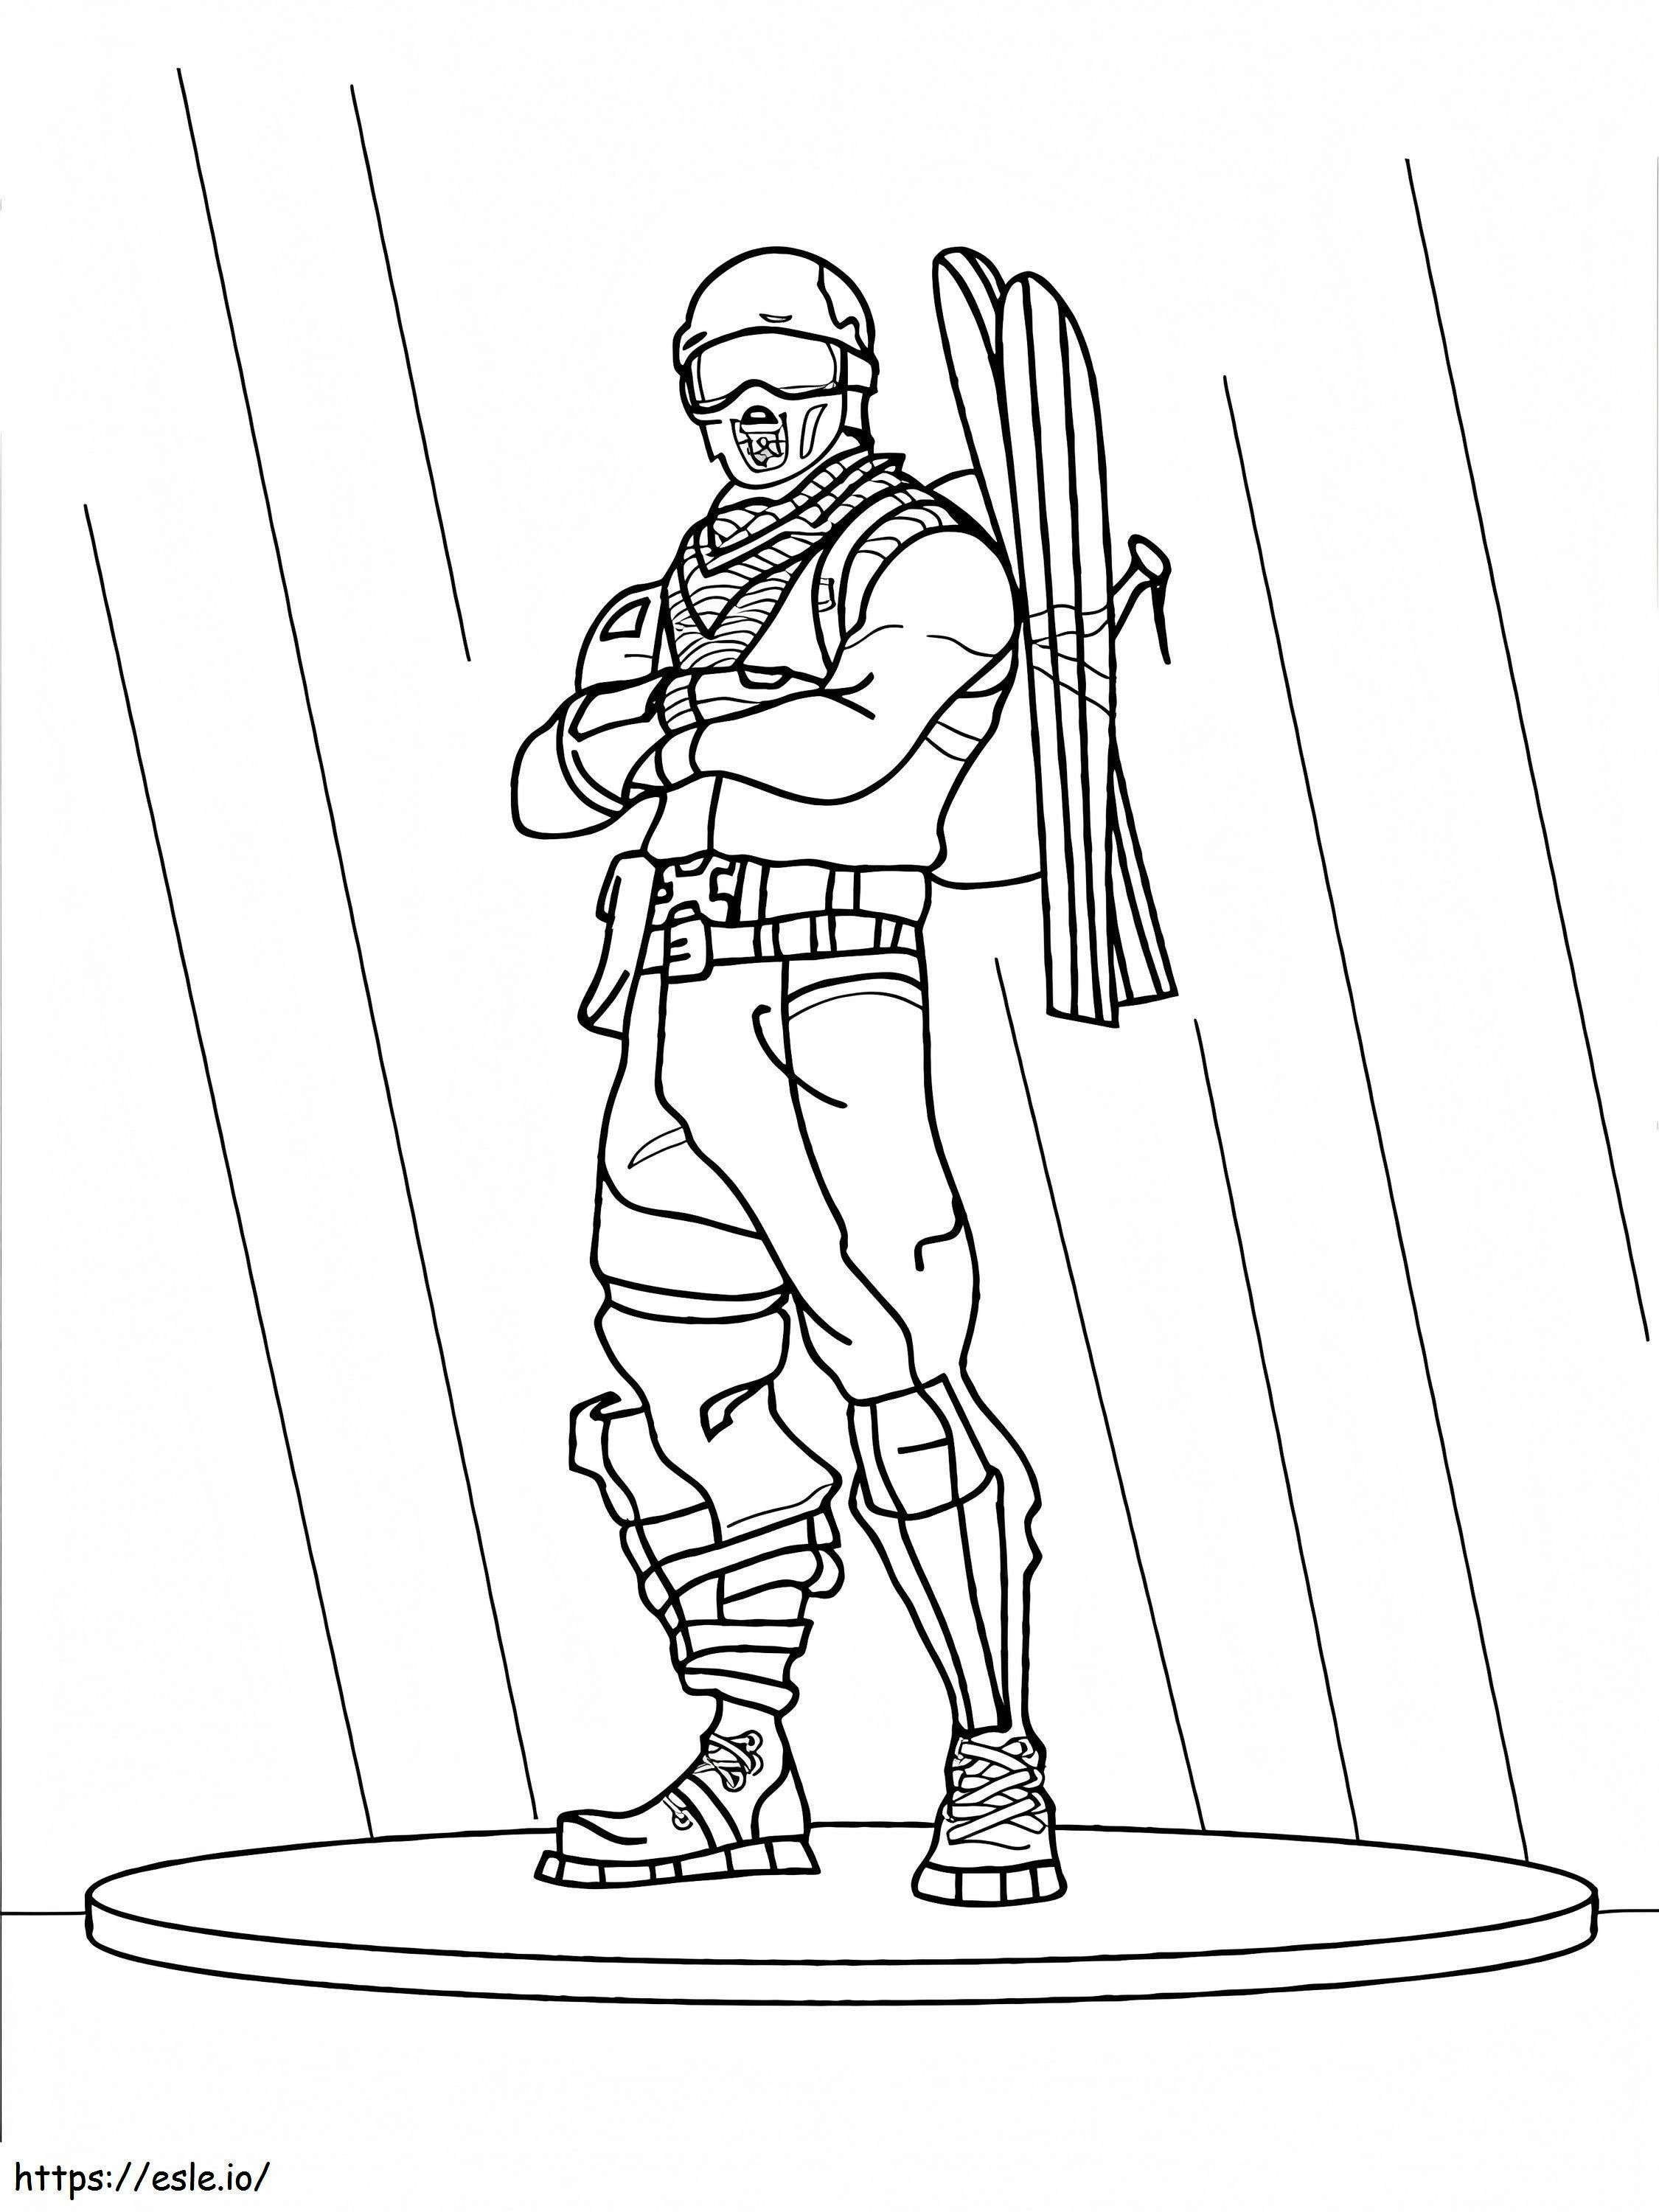 Alpine Ace Fortnite 768X1024 coloring page